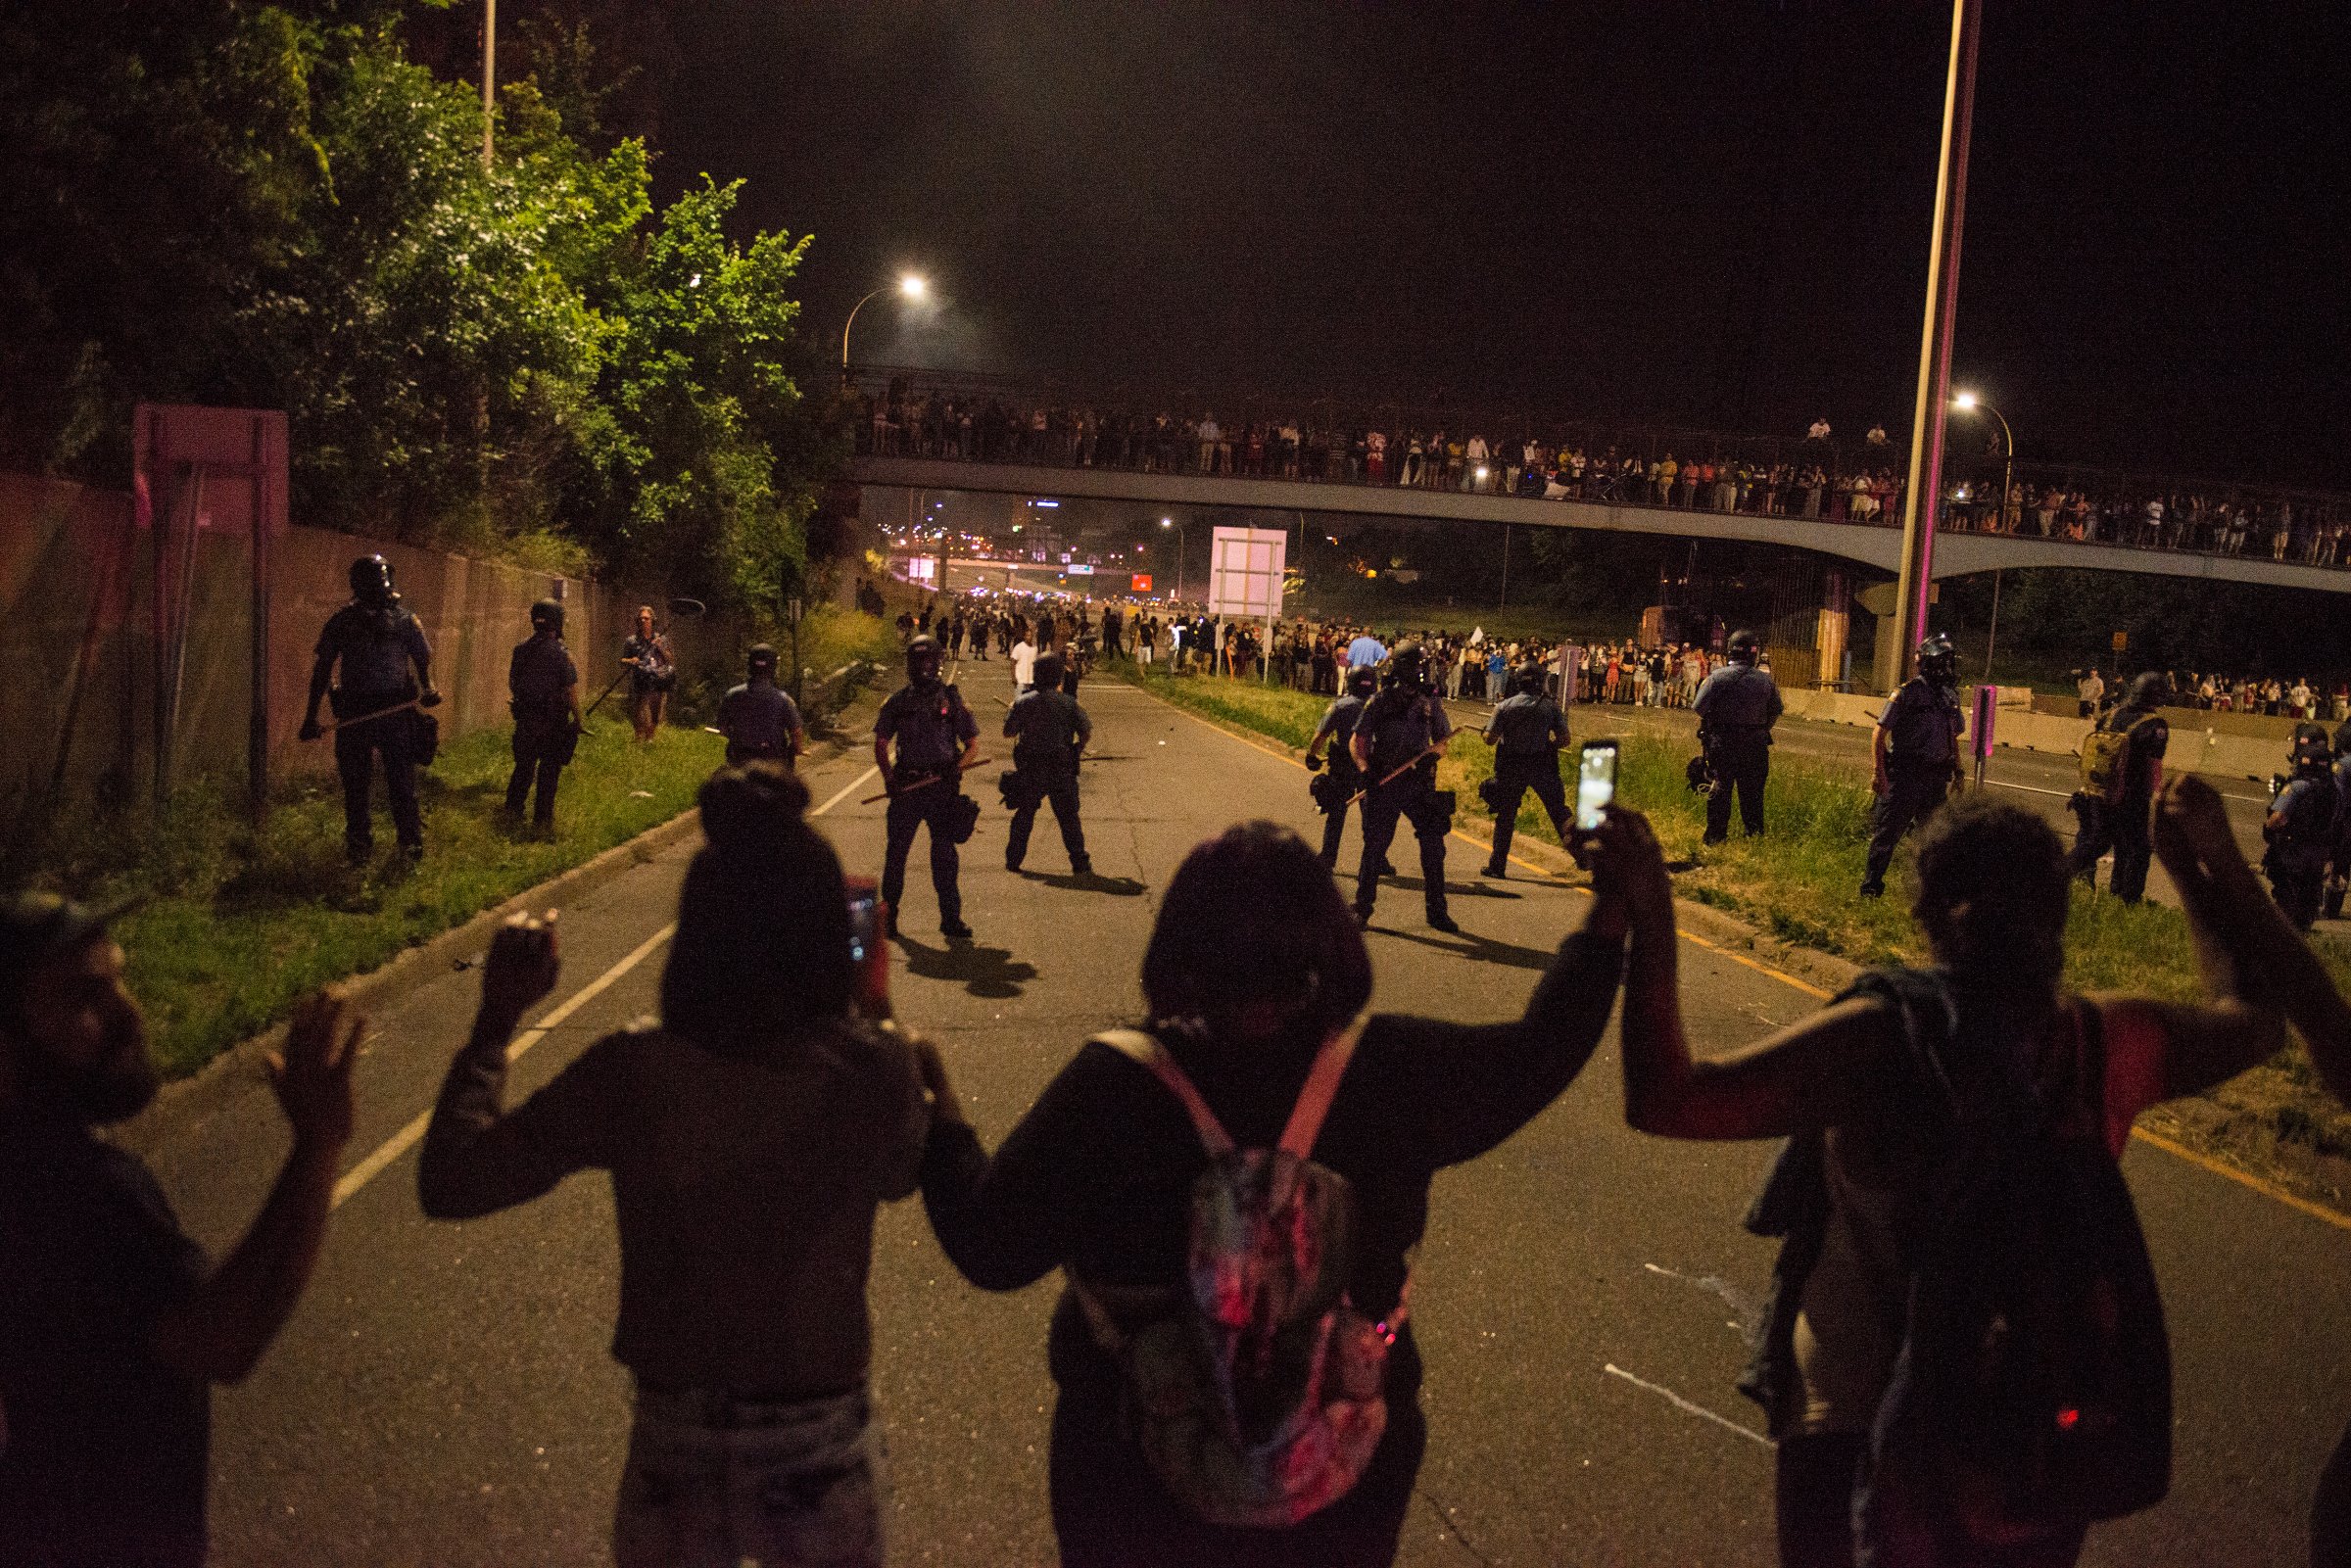 Protesters link hands on shut down highway I-94 on July 9, 2016 in St. Paul, Minnesota, in response to the police killing of Philando Castile on June 6, 2016 in Falcon Heights, Minnesota